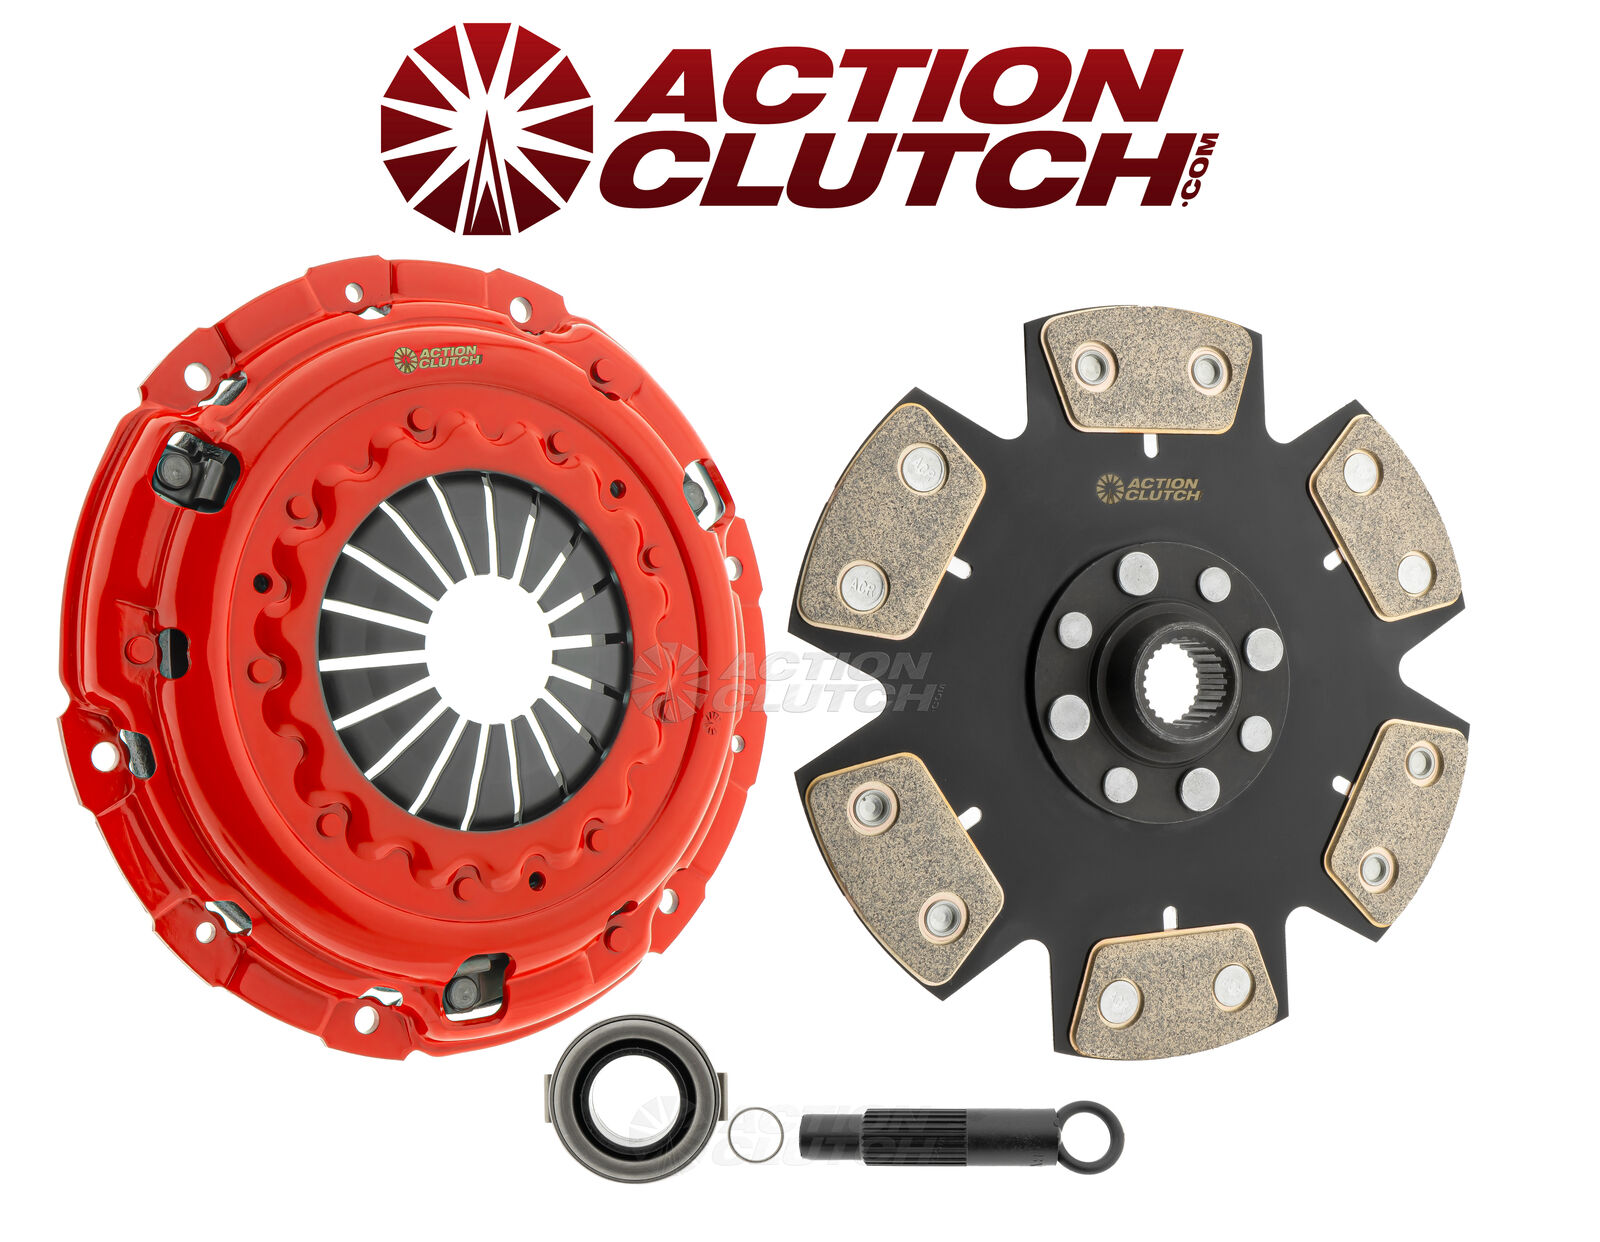 ACTION STAGE 3 CLUTCH KIT fits 2016-2019 Civic 1.5T 2017-2019 Civic Si 1.5T